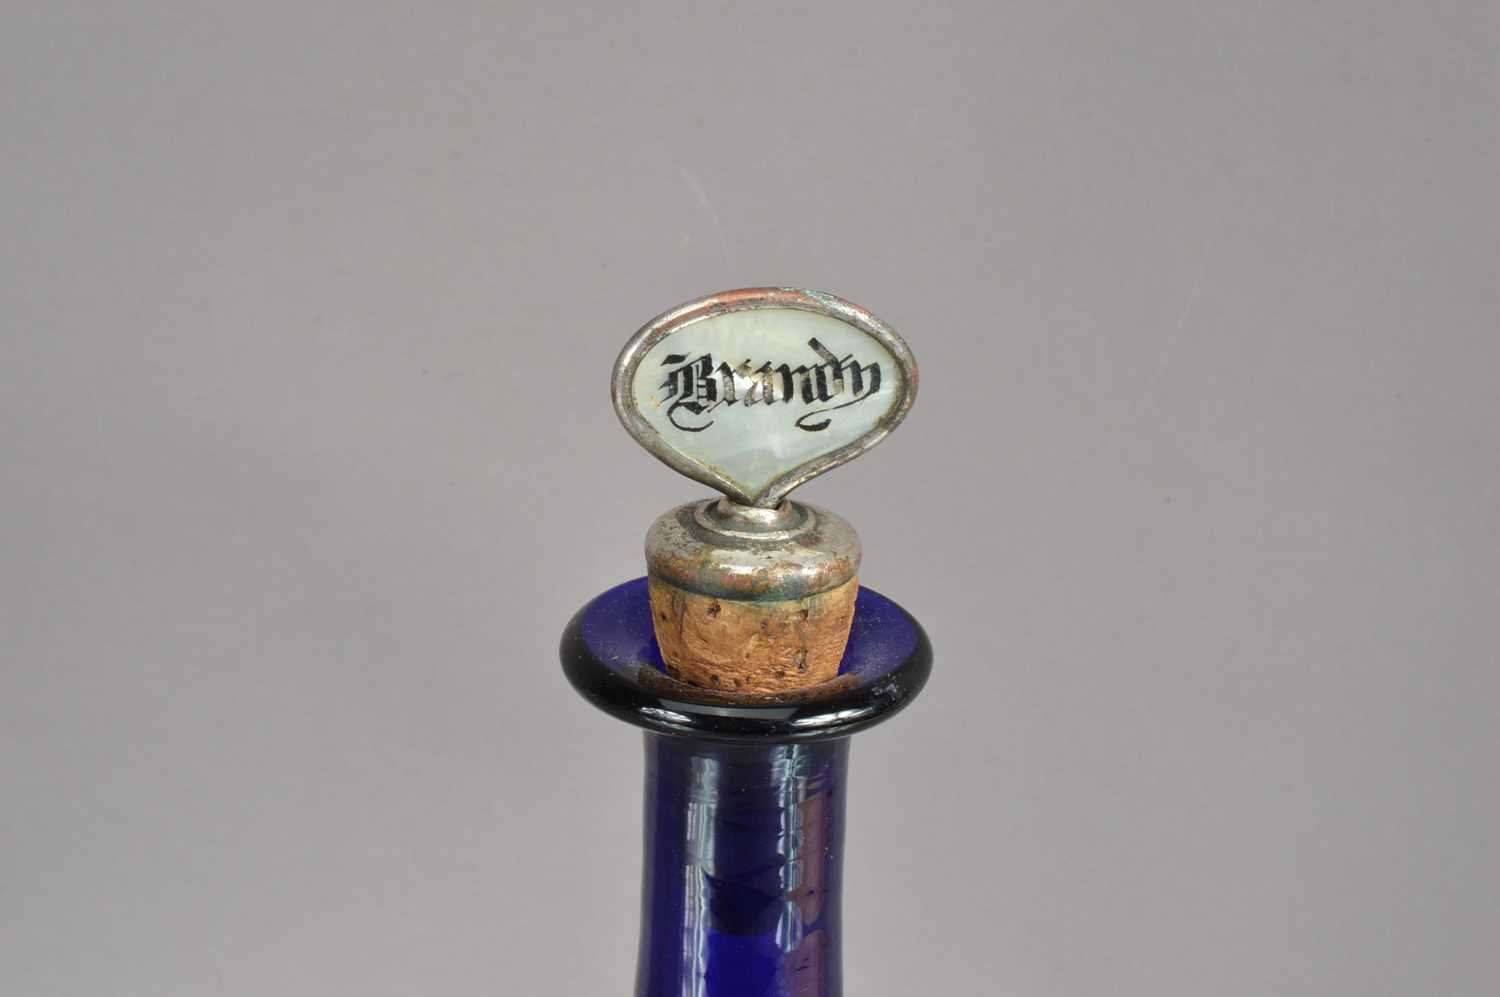 A 'Bristol Blue' glass bottle-shape decanter with silver plated 'Brandy' label stopper, - Image 2 of 4